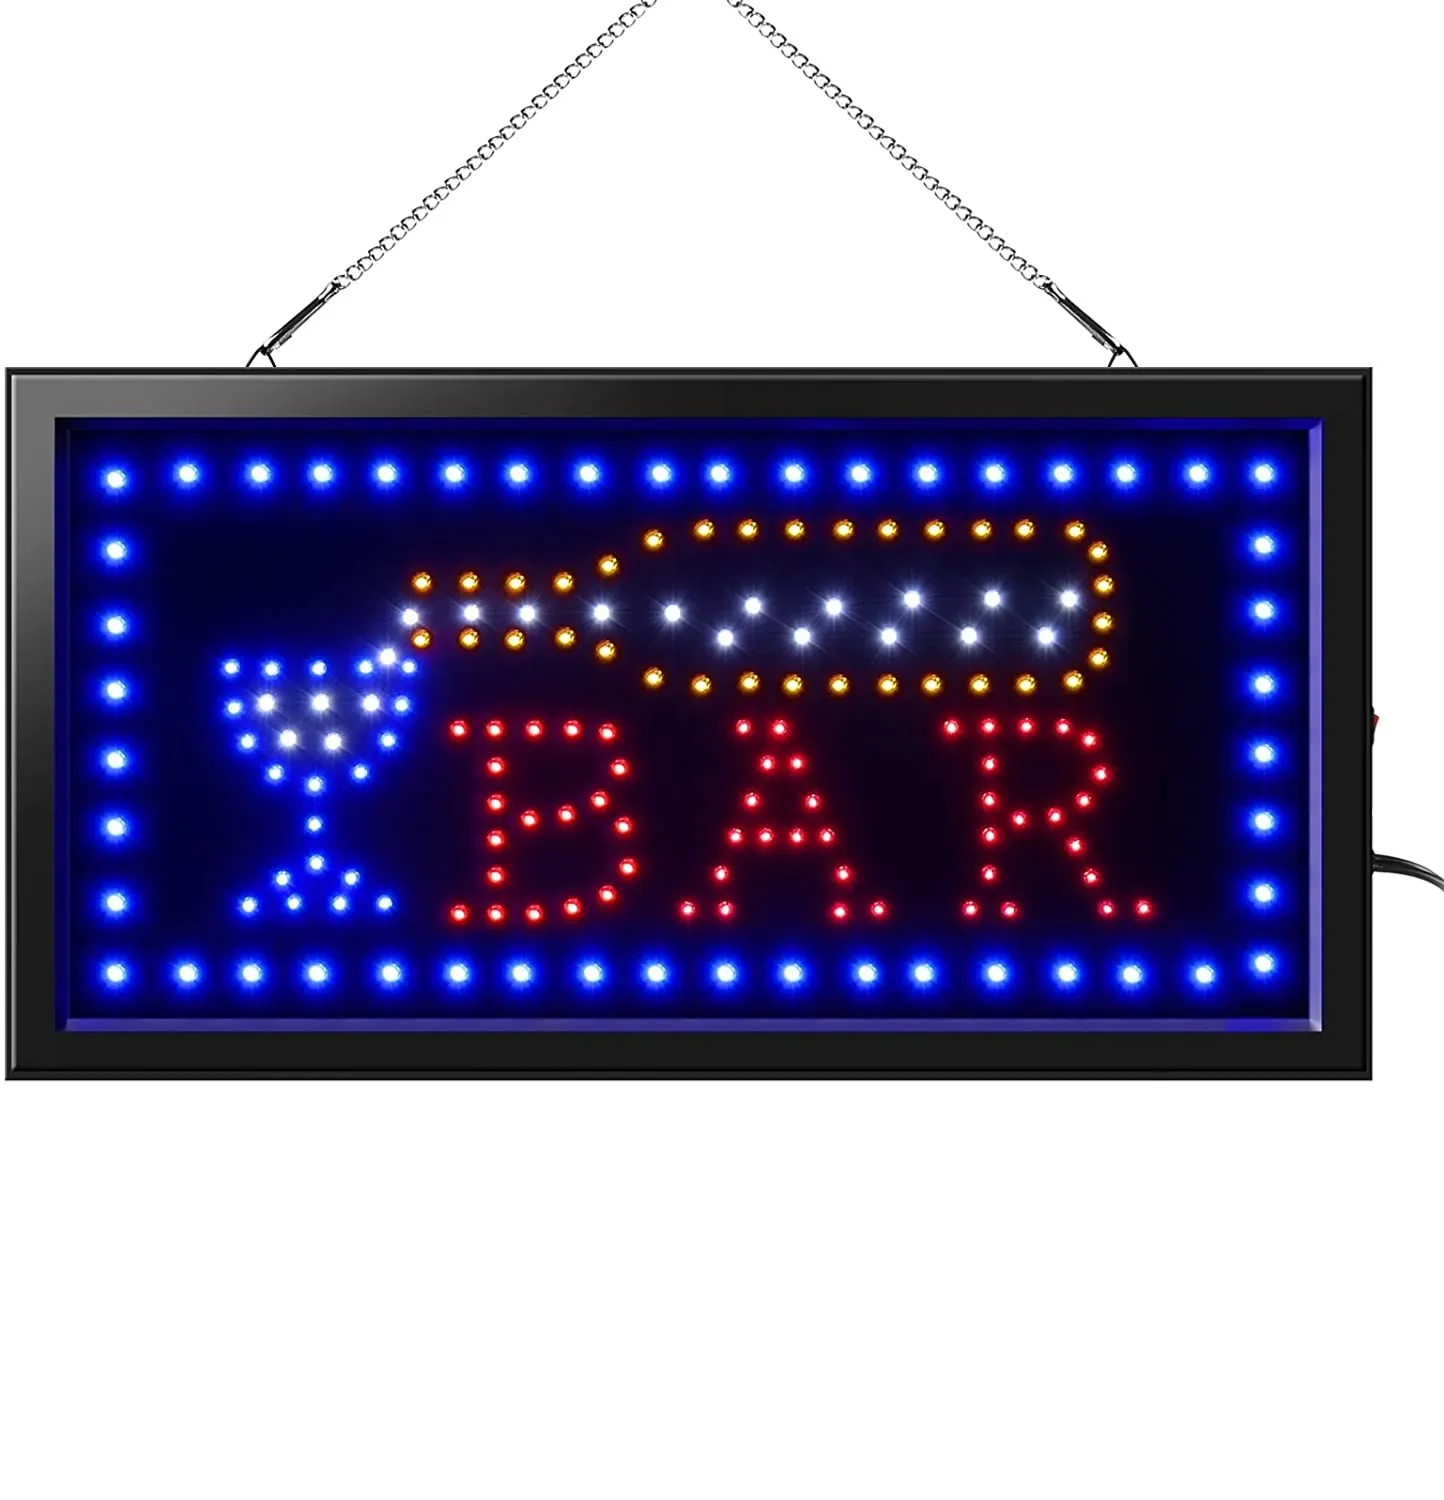 LED OPEN BAR sign electric display advertisement board lights for bar business shop hotel wall decor